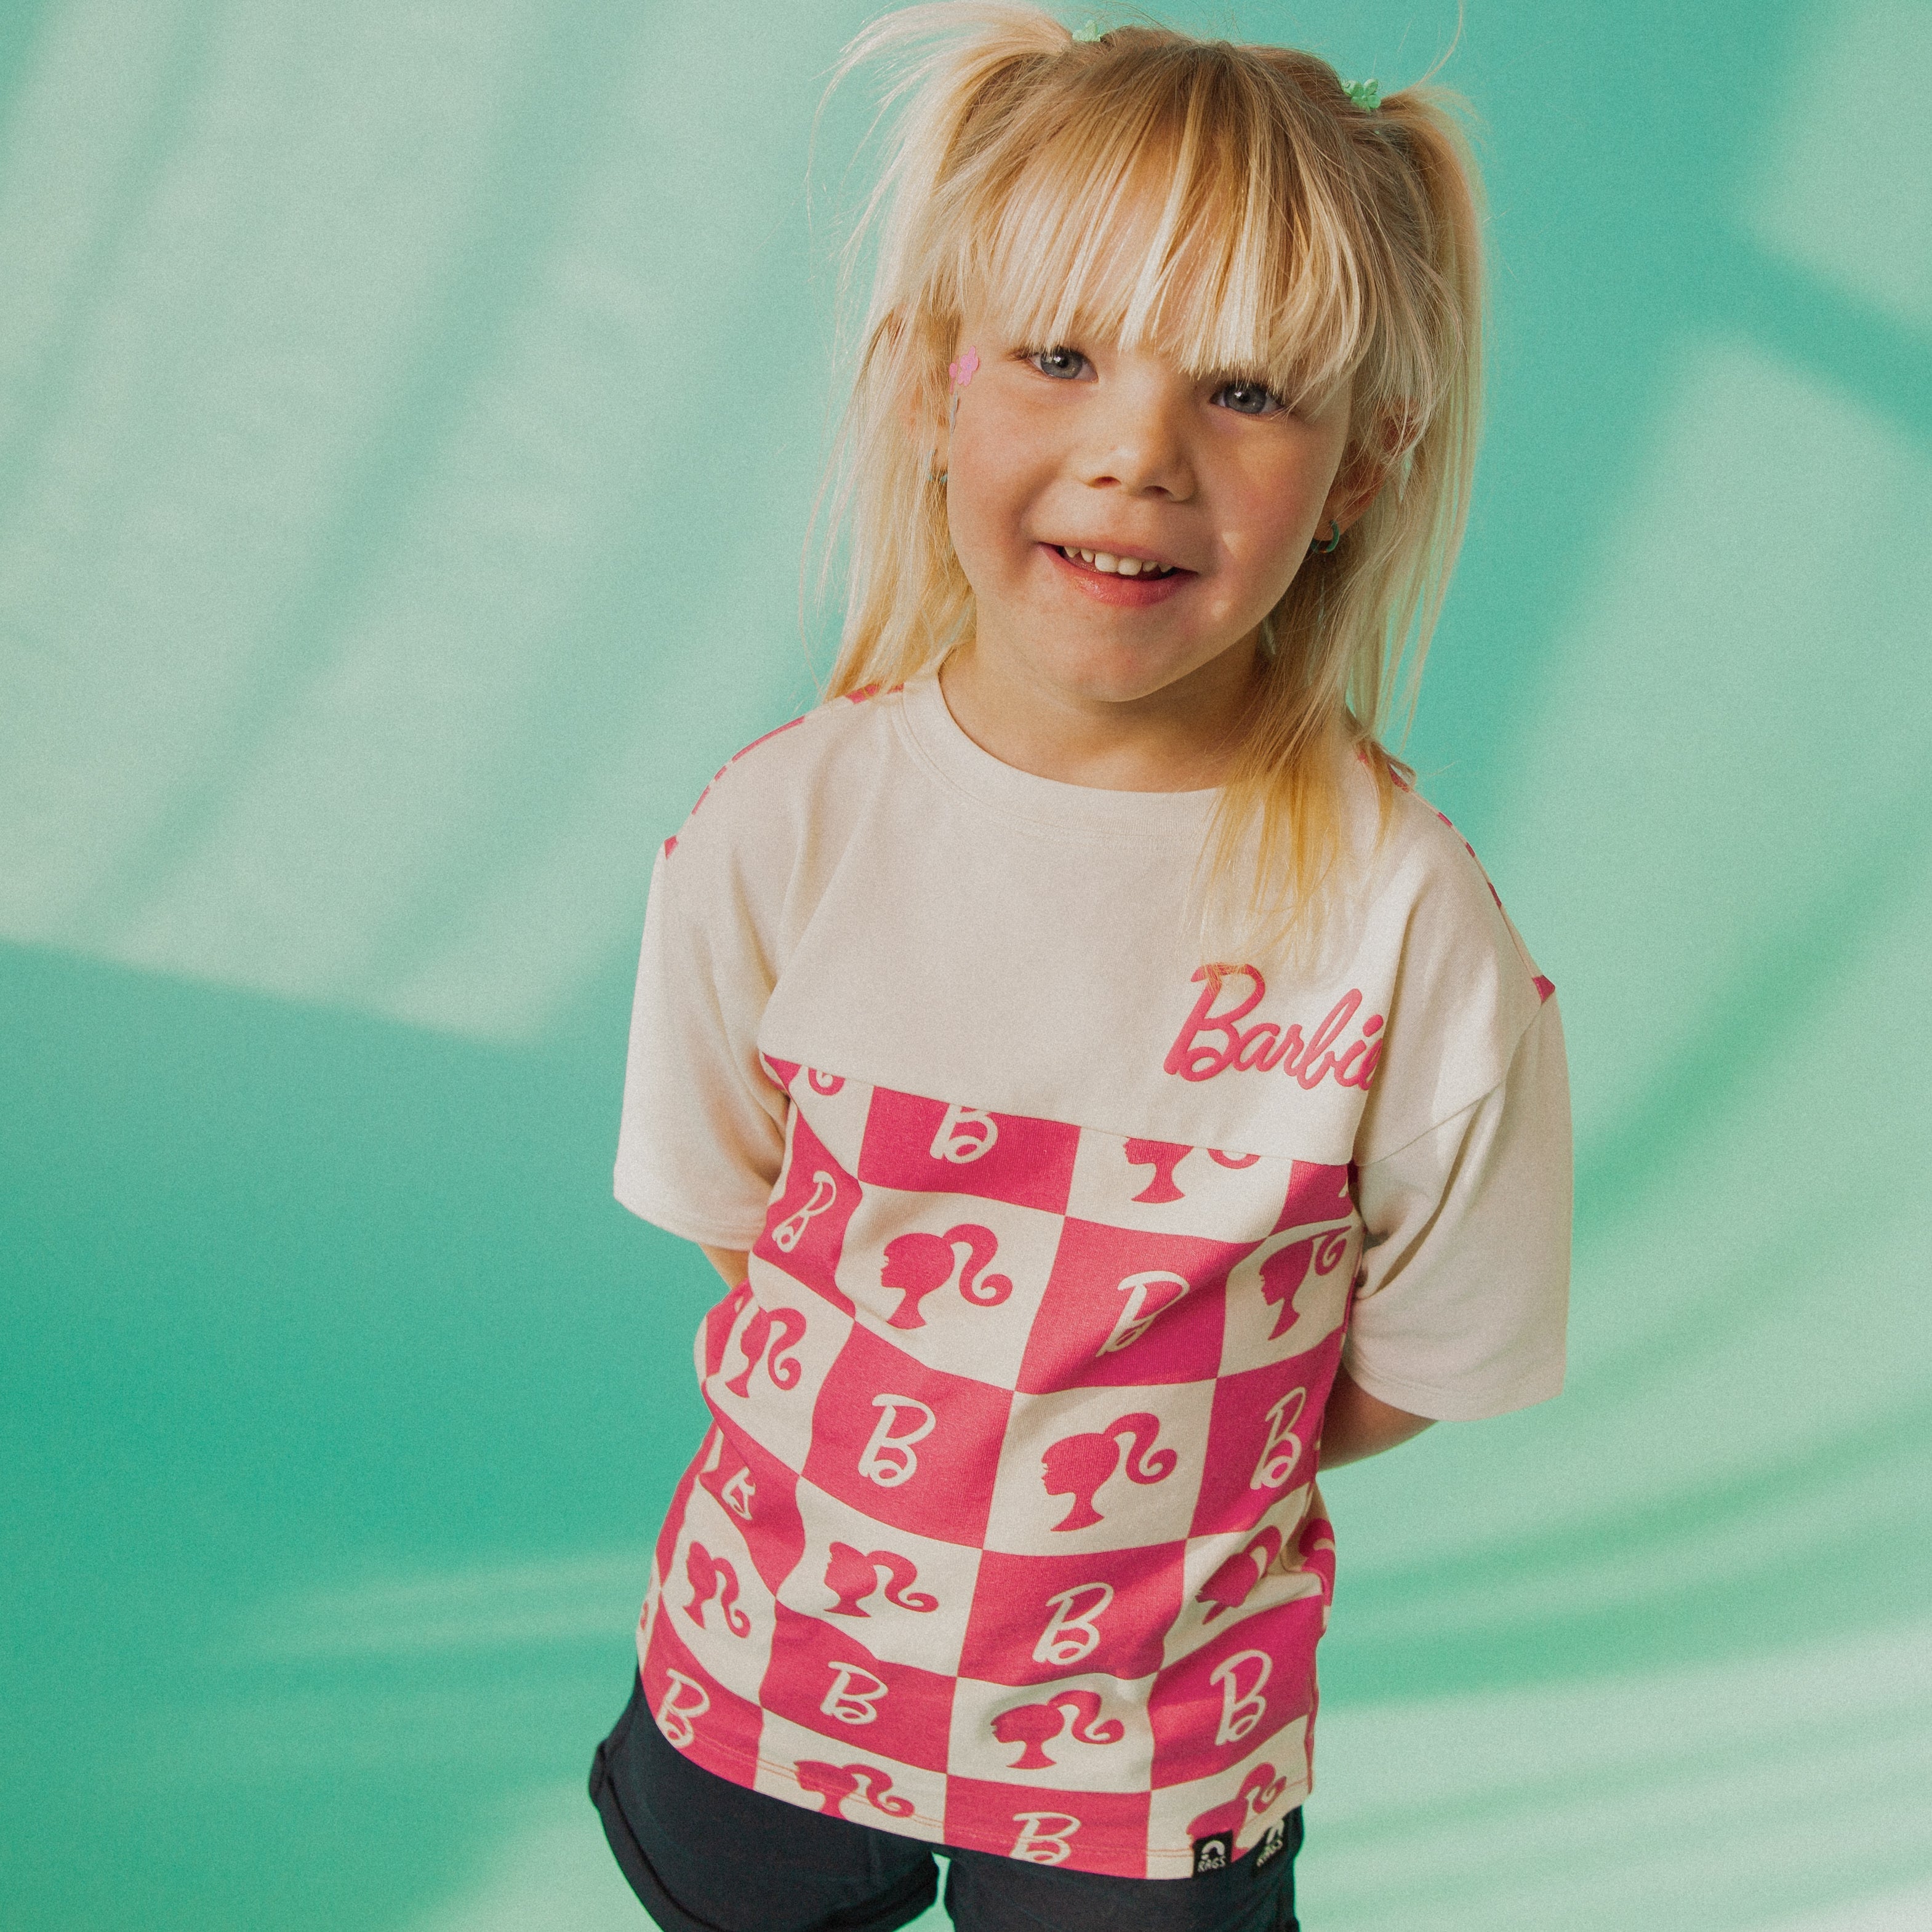 ***PREORDER*** Drop Shoulder Tee - Barbie Check PREORDER - Mattel Barbie Collection by RAGS